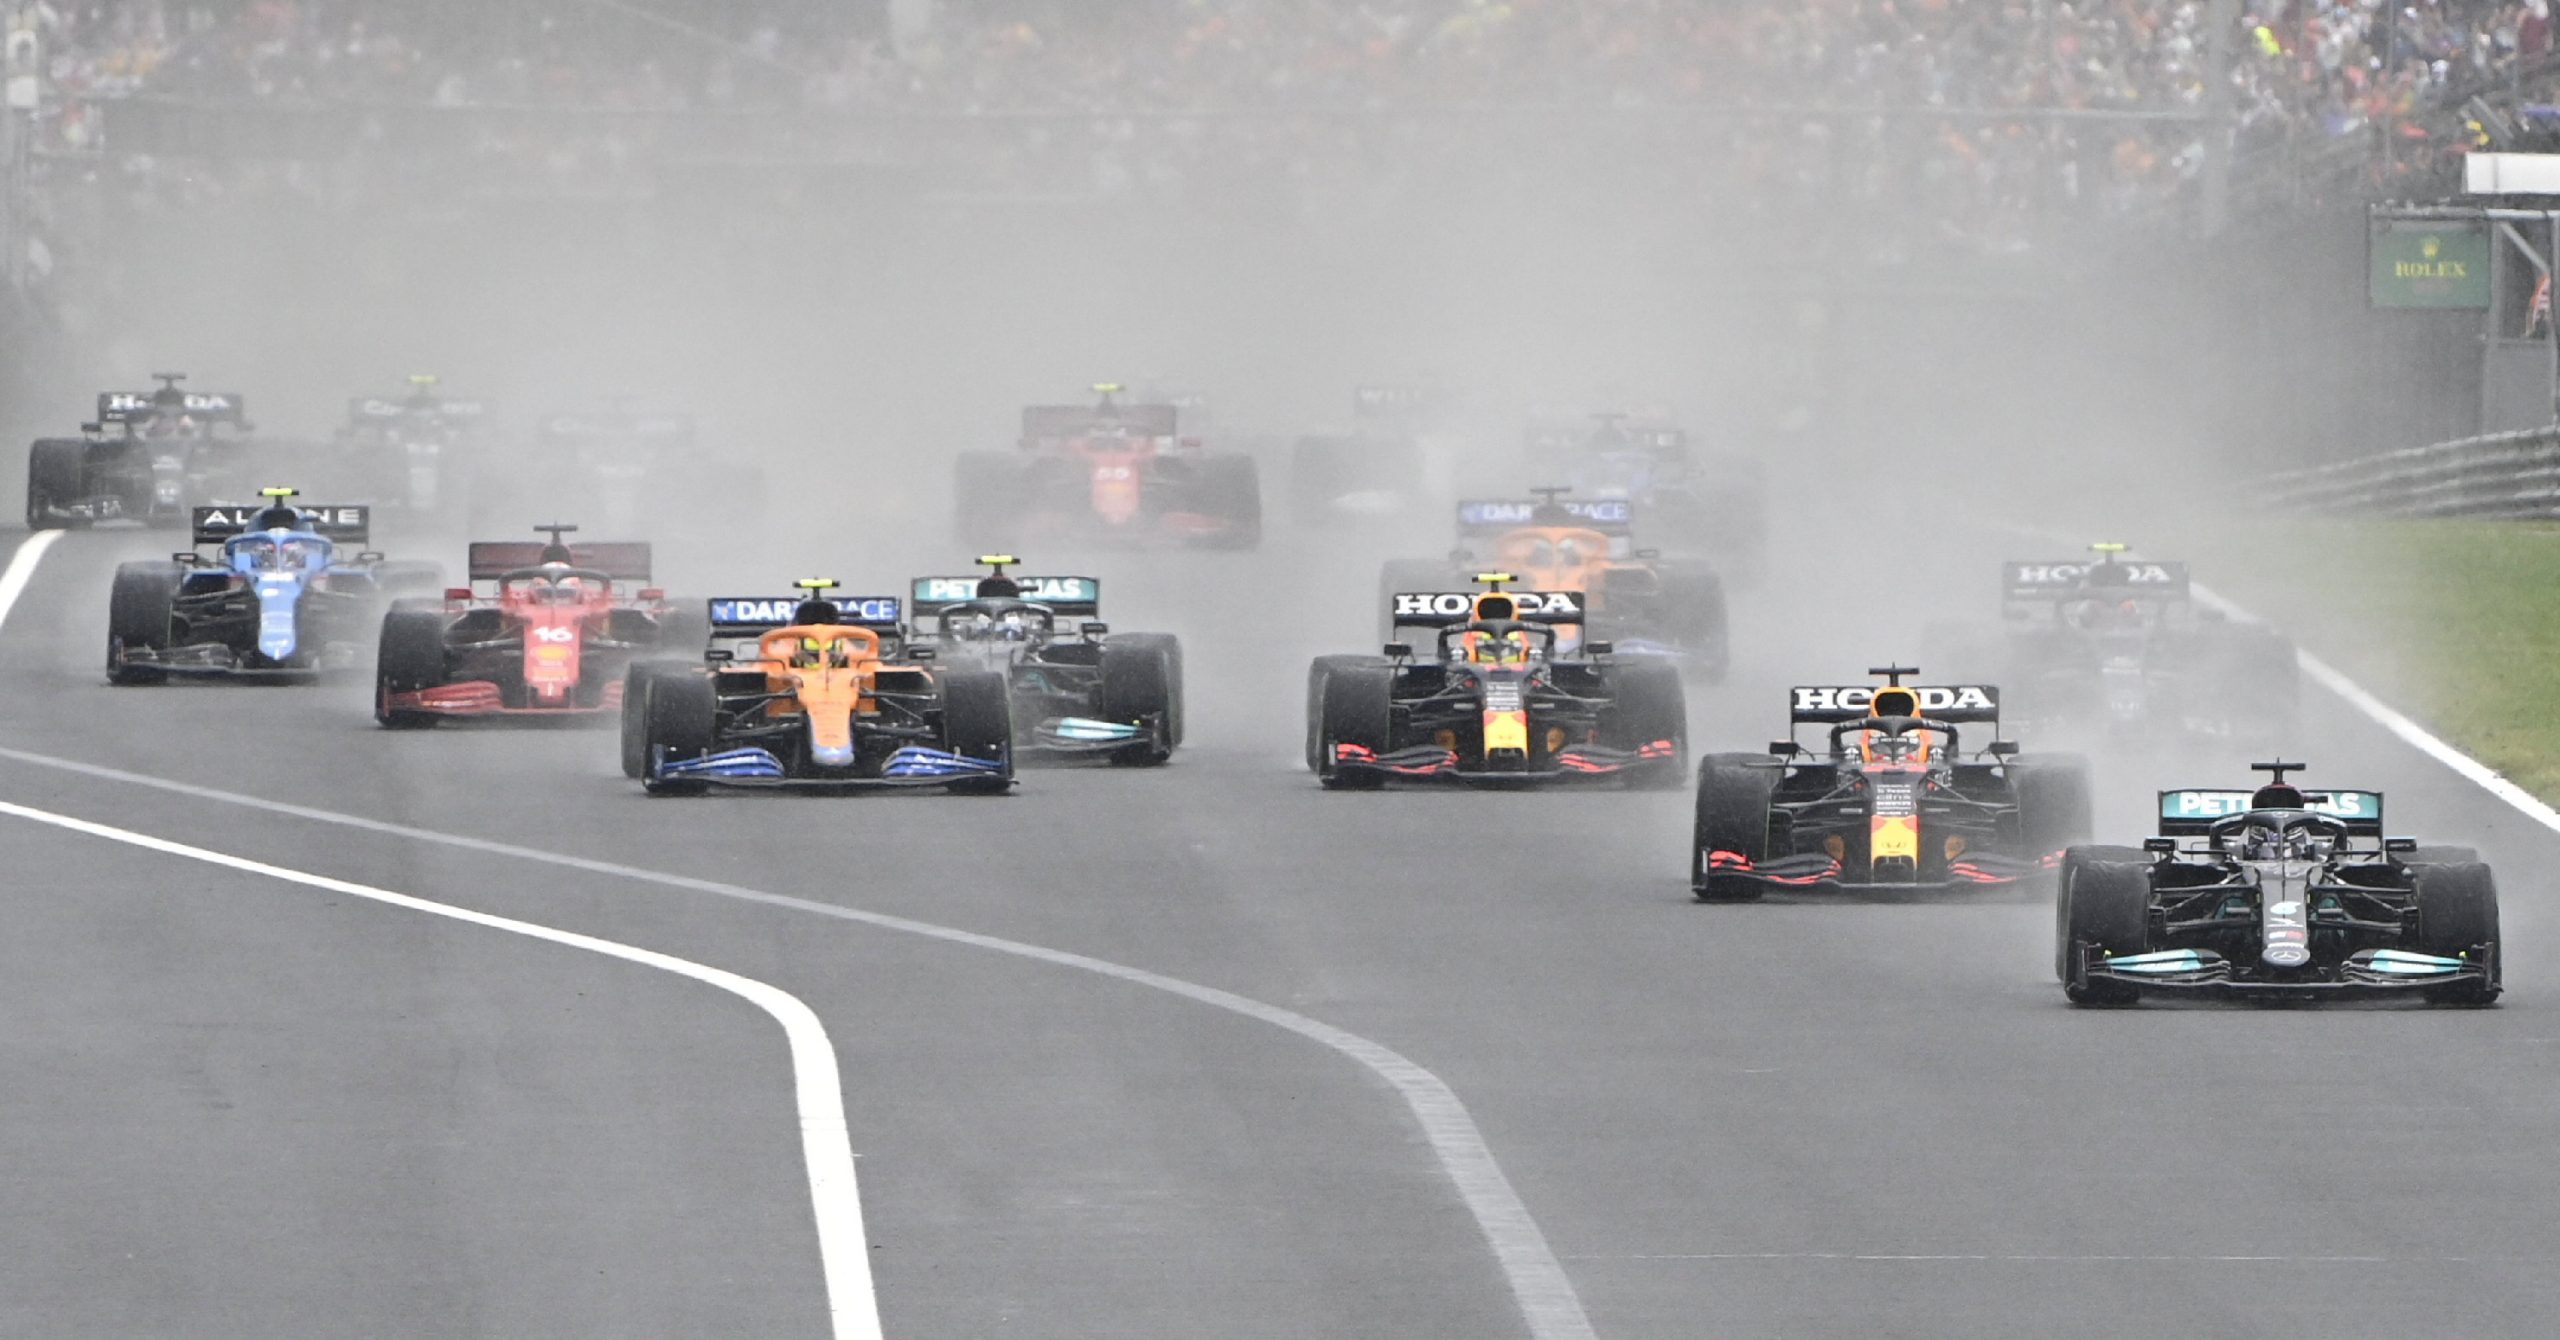 There will be 23 runners in the Formula 1 World Championship next year